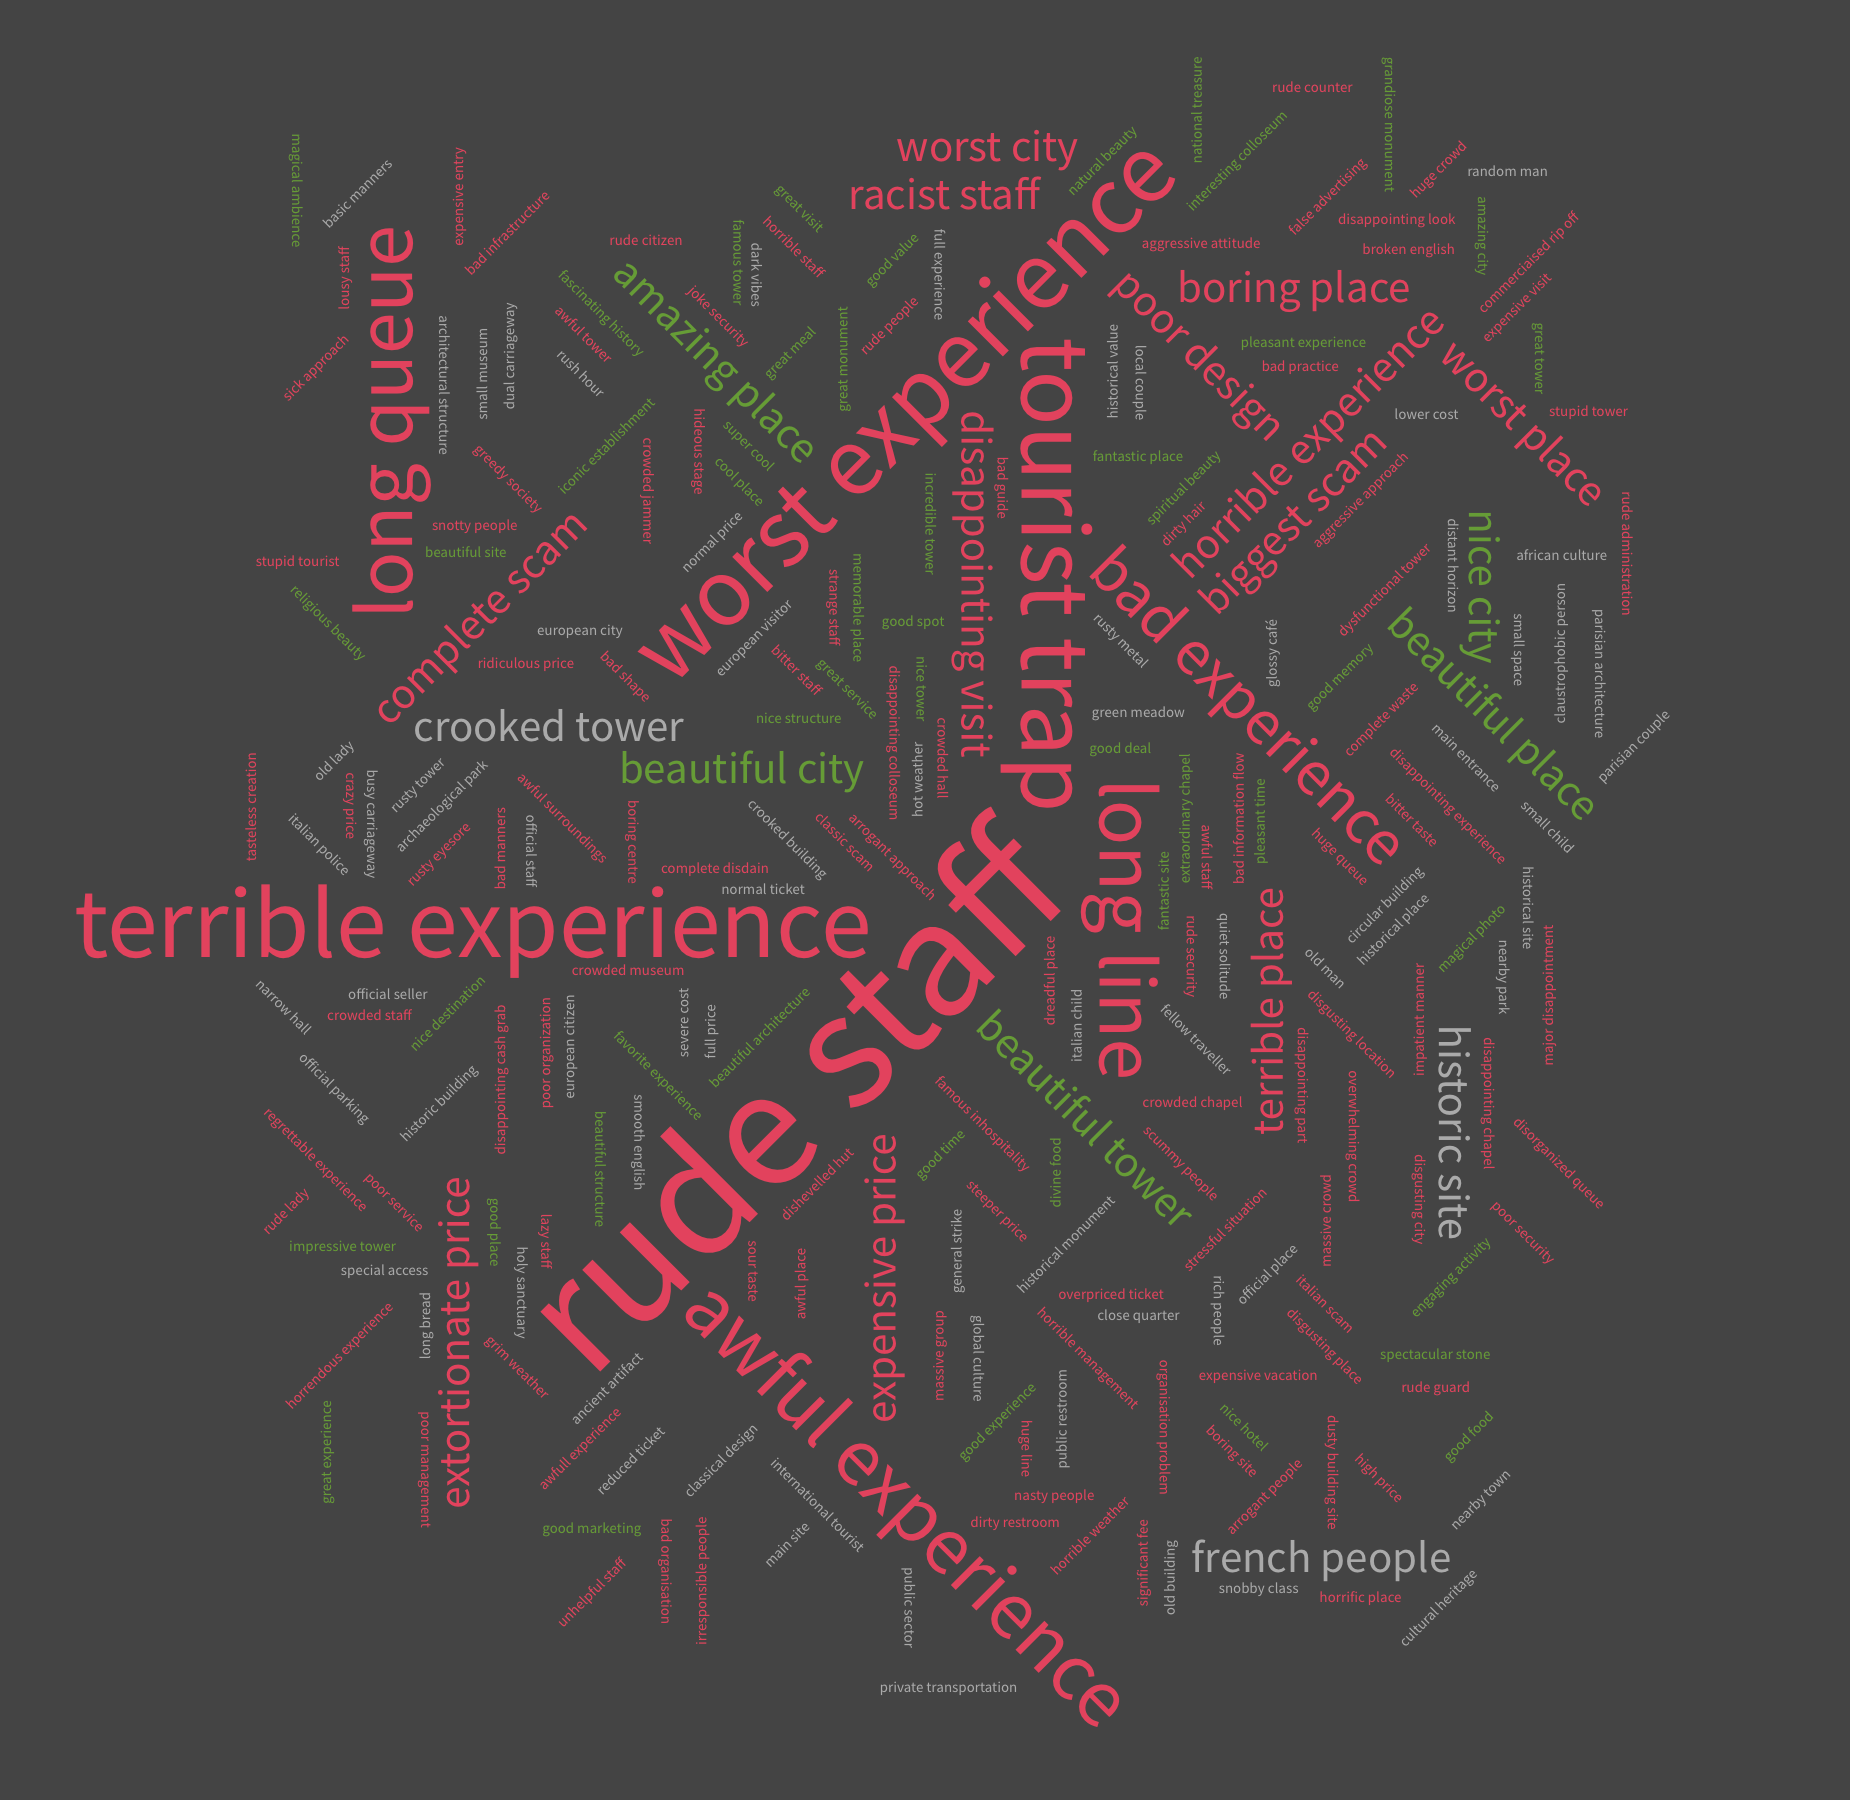 Sentiment analysis visualized in word clouds: 500 bad reviews of 5 landmarks 